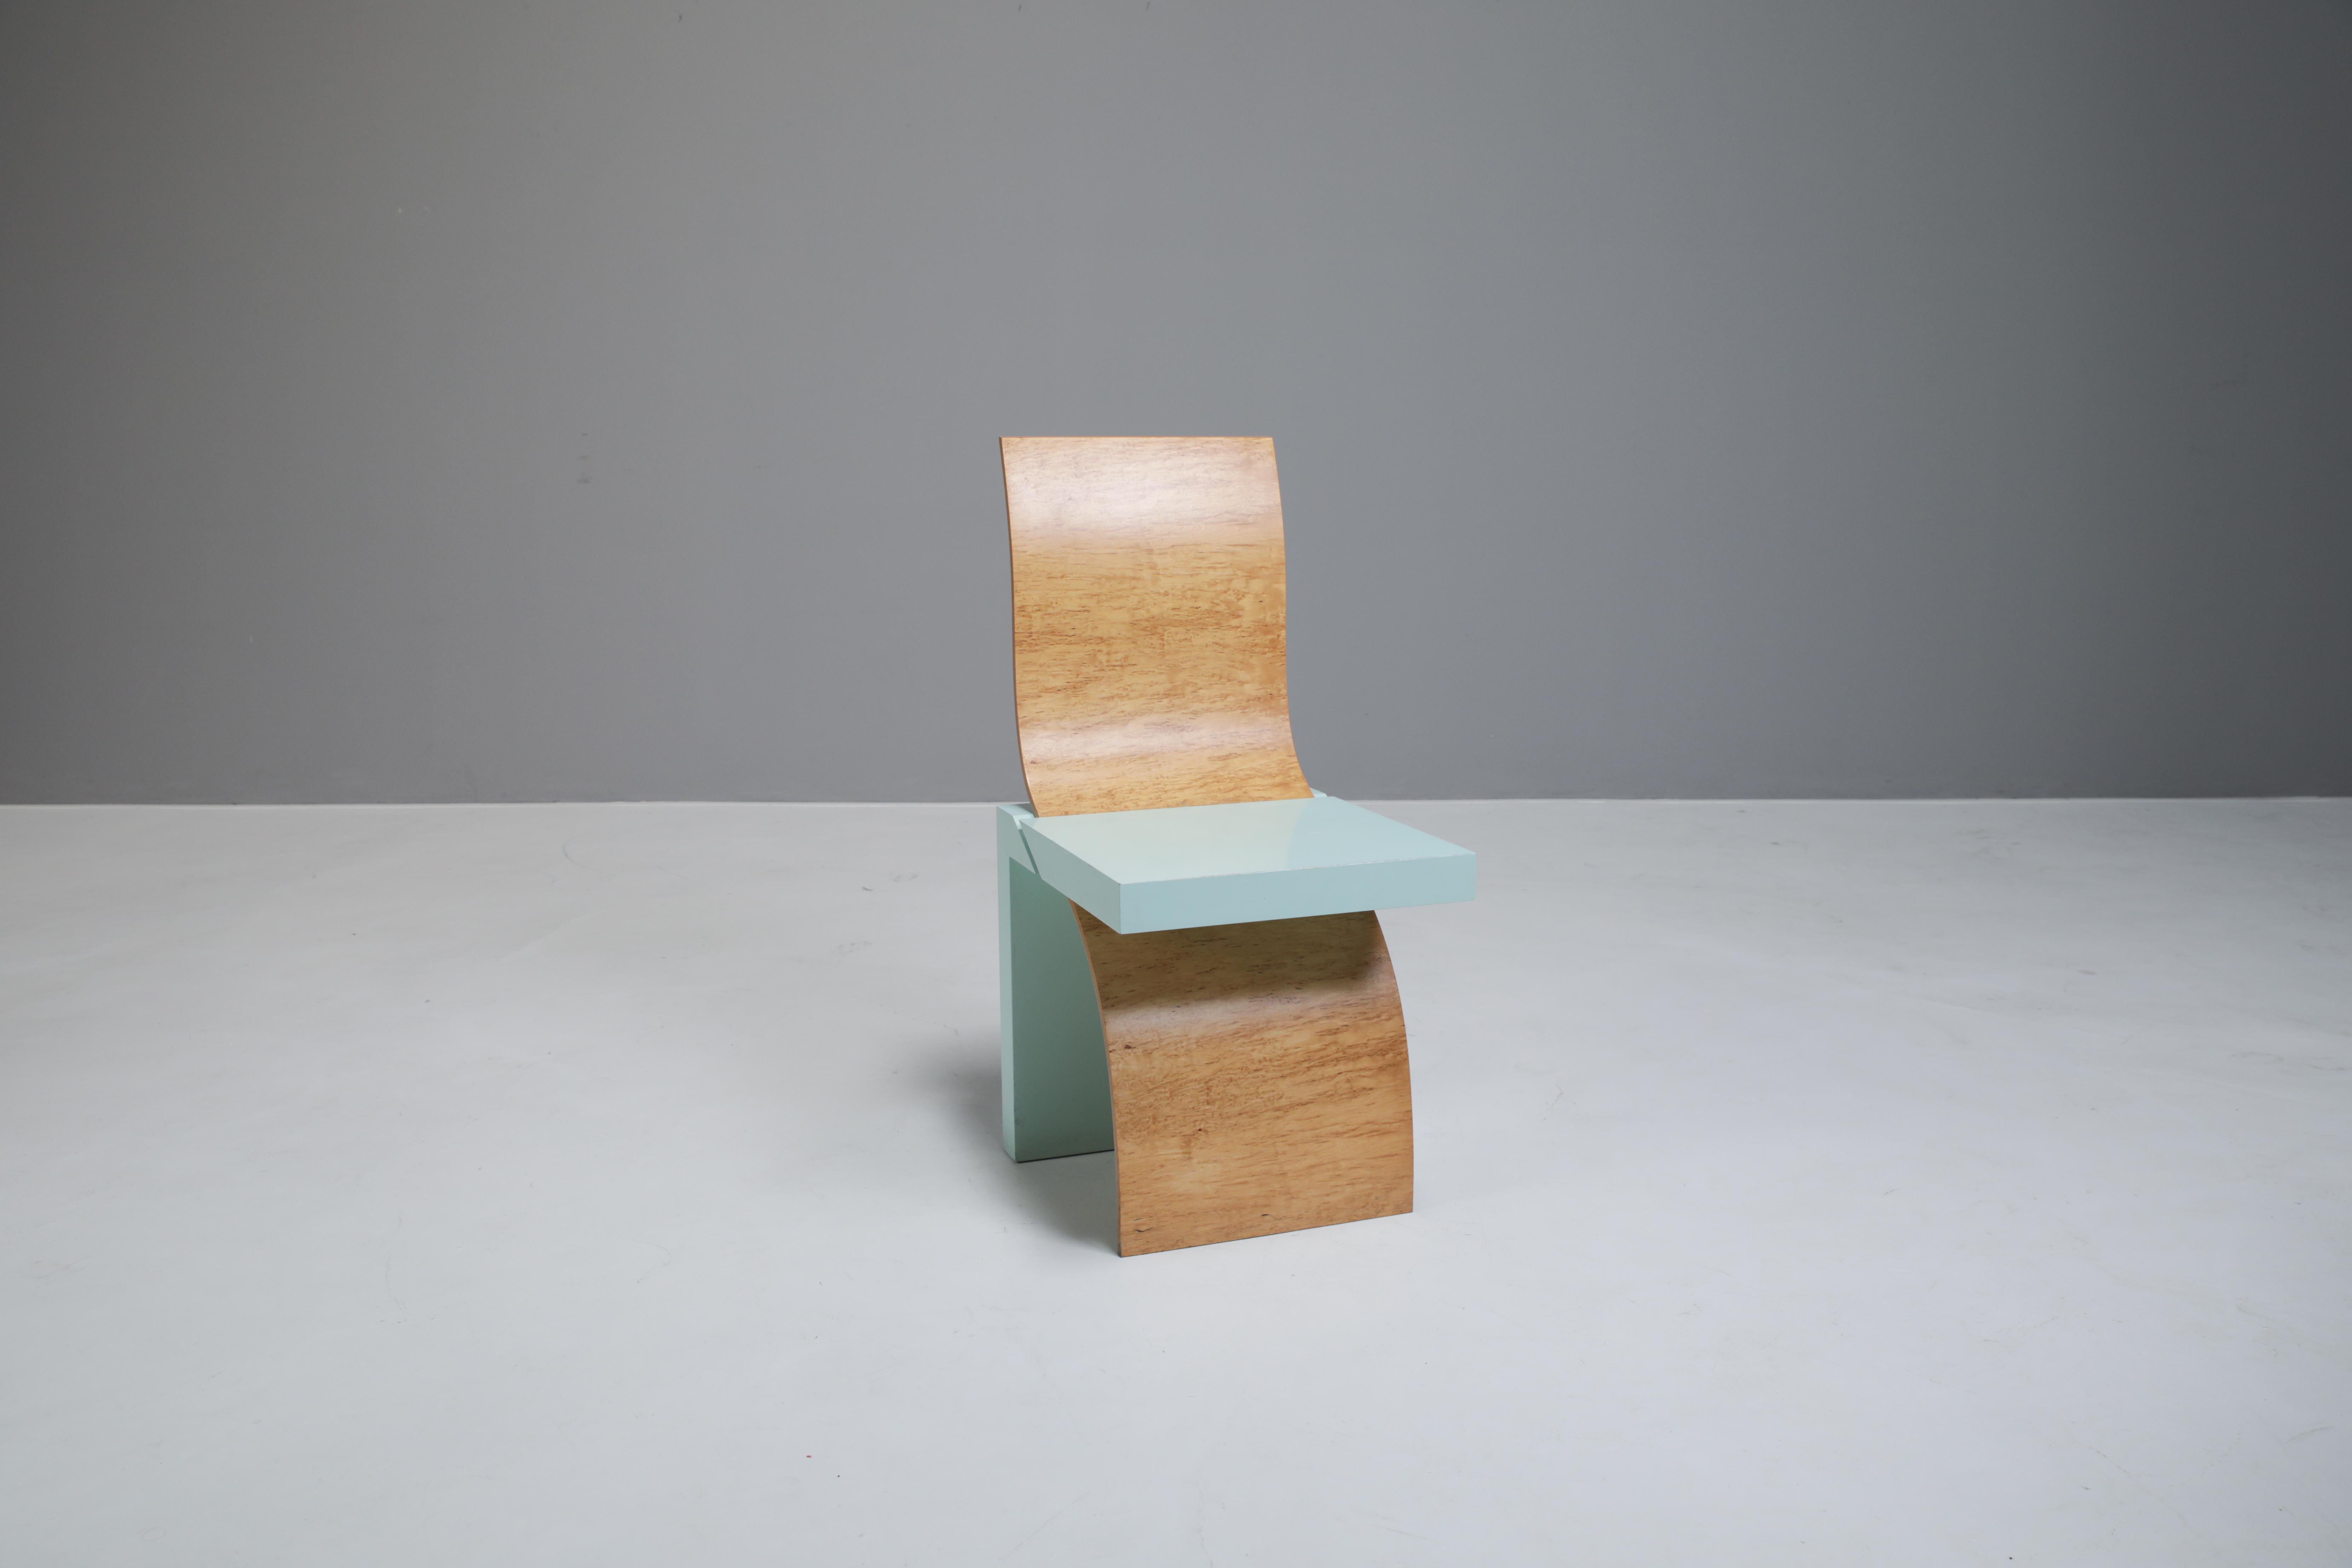 On behalf of Oedekoven Design, Cremer & Cremer, known for producing prototypes for international designers, produced the Leda chair.
The curved element of Angela Oedekoven’s chair is made of birch veneer and the seat area of lacquered wood.
It can